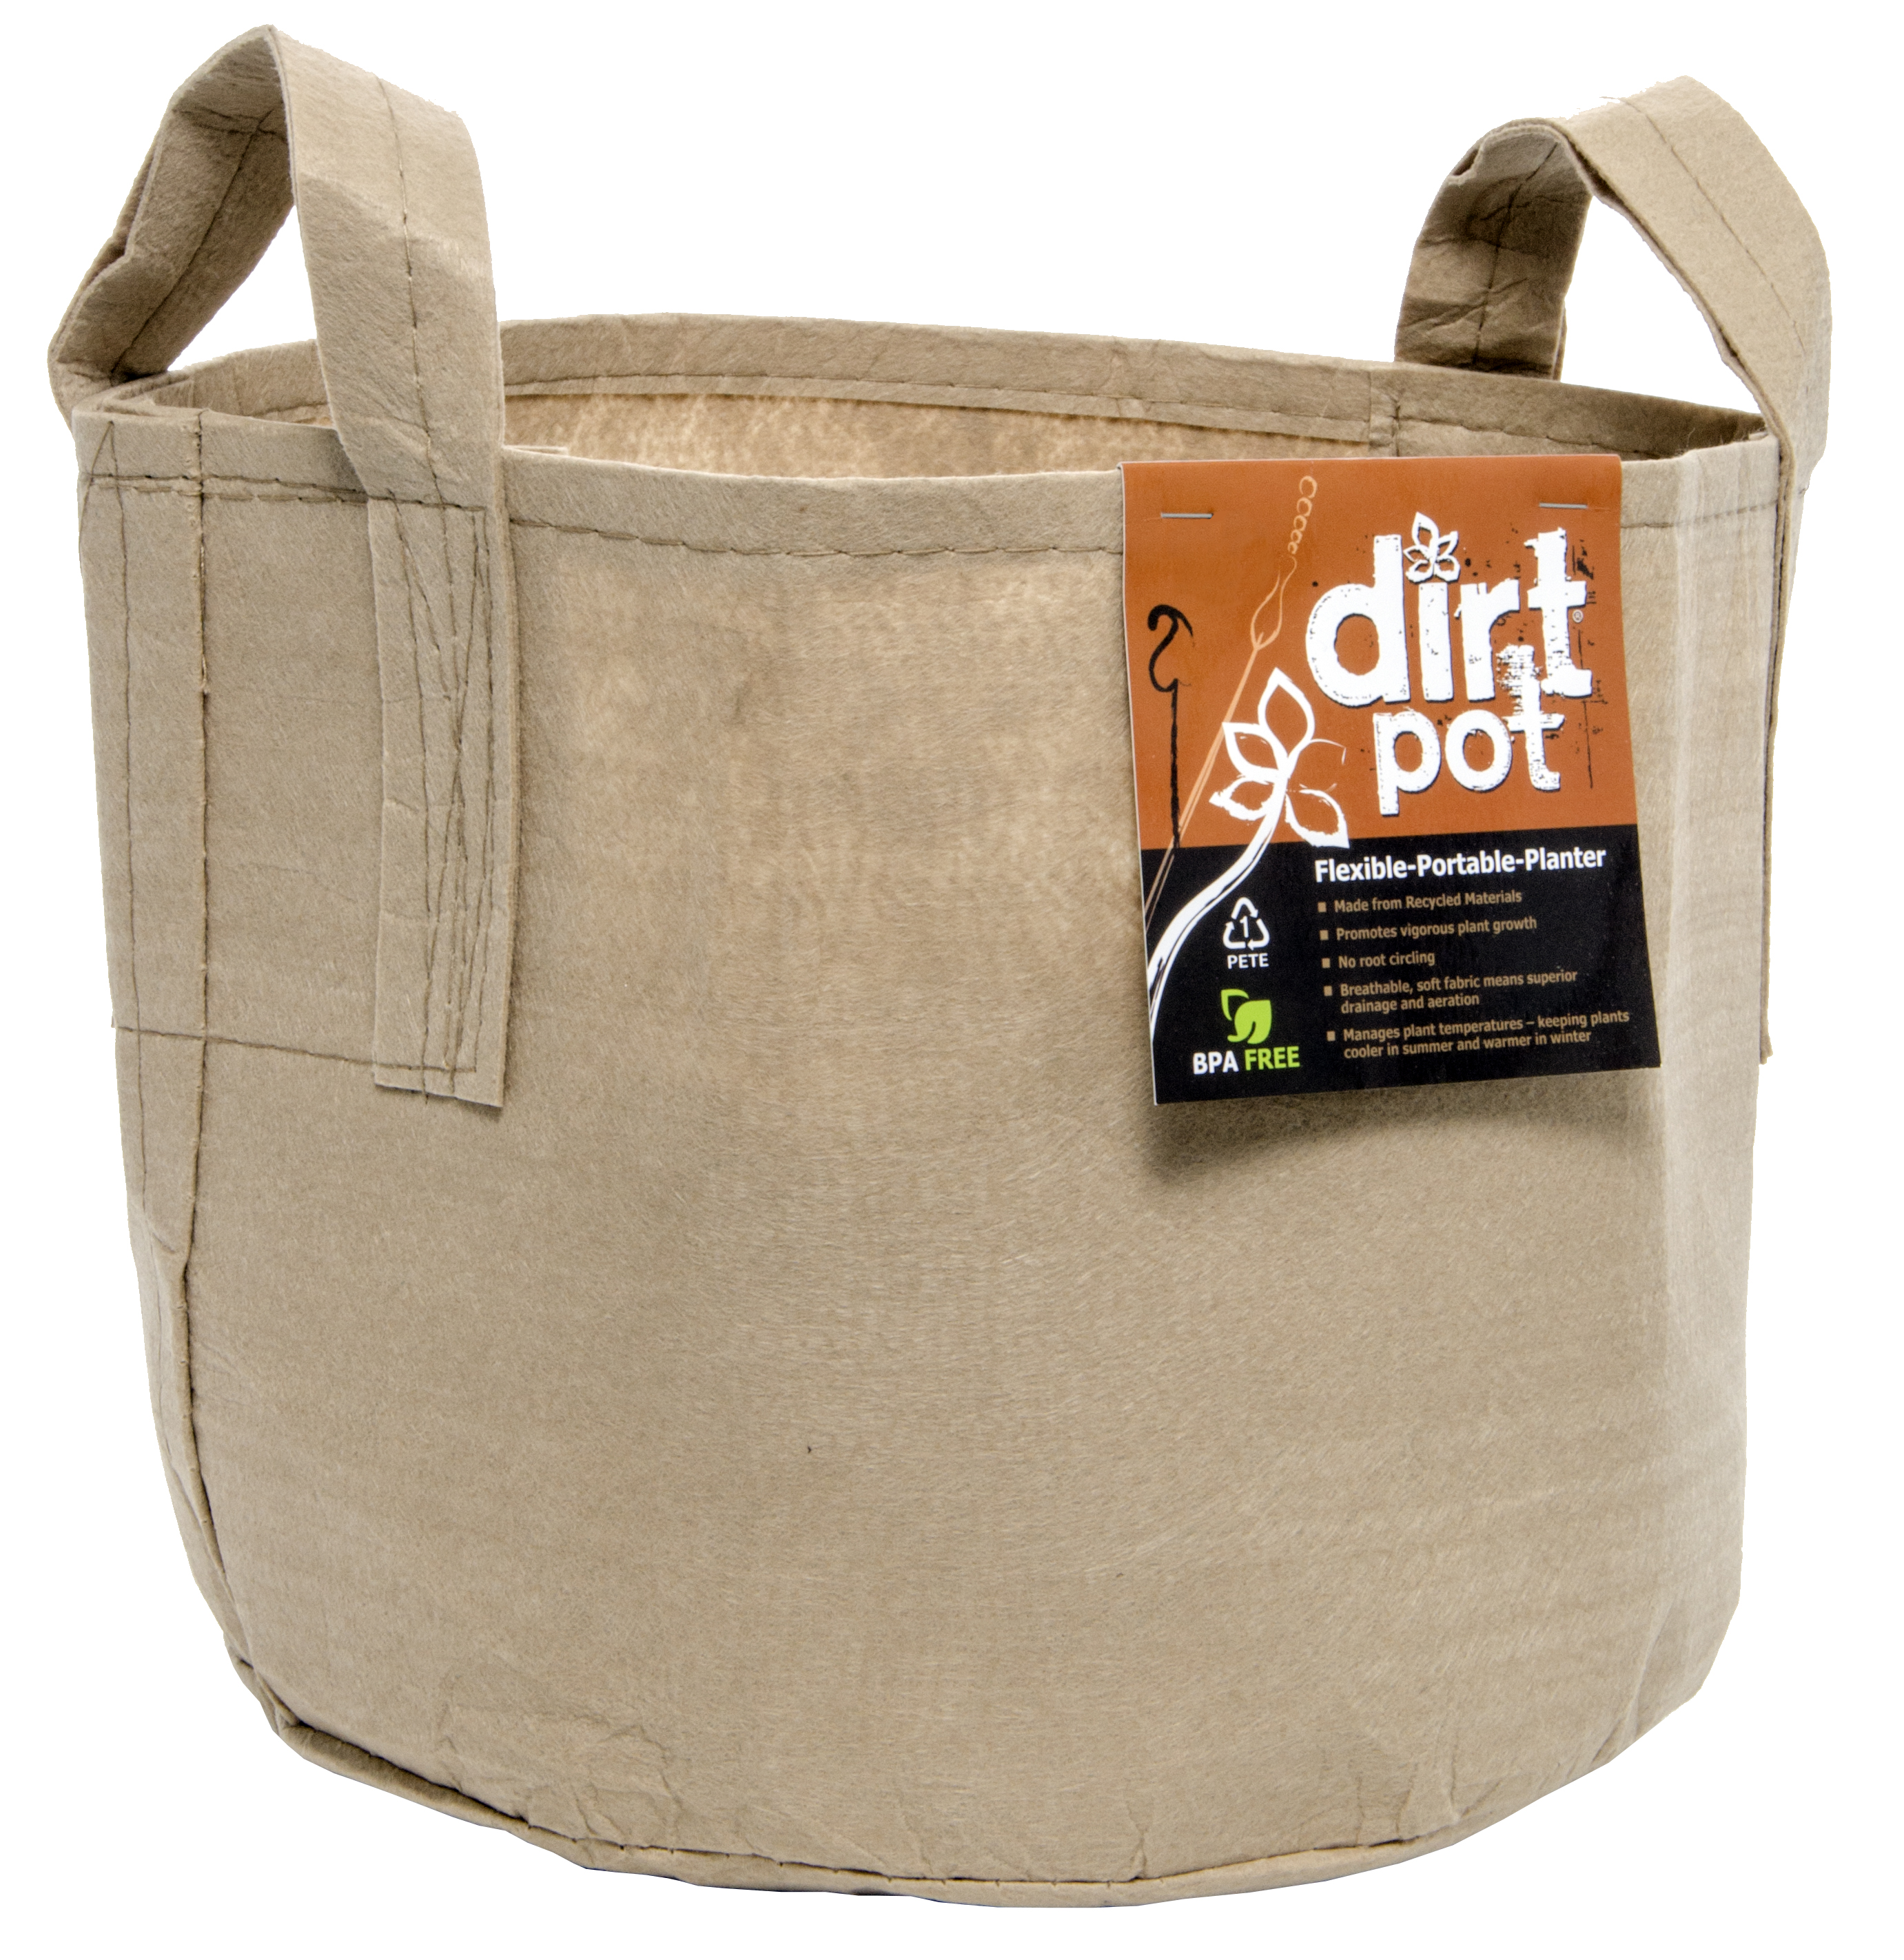 Picture for Dirt Pot Flexible Portable Planter, Tan, 30 gal, with handles